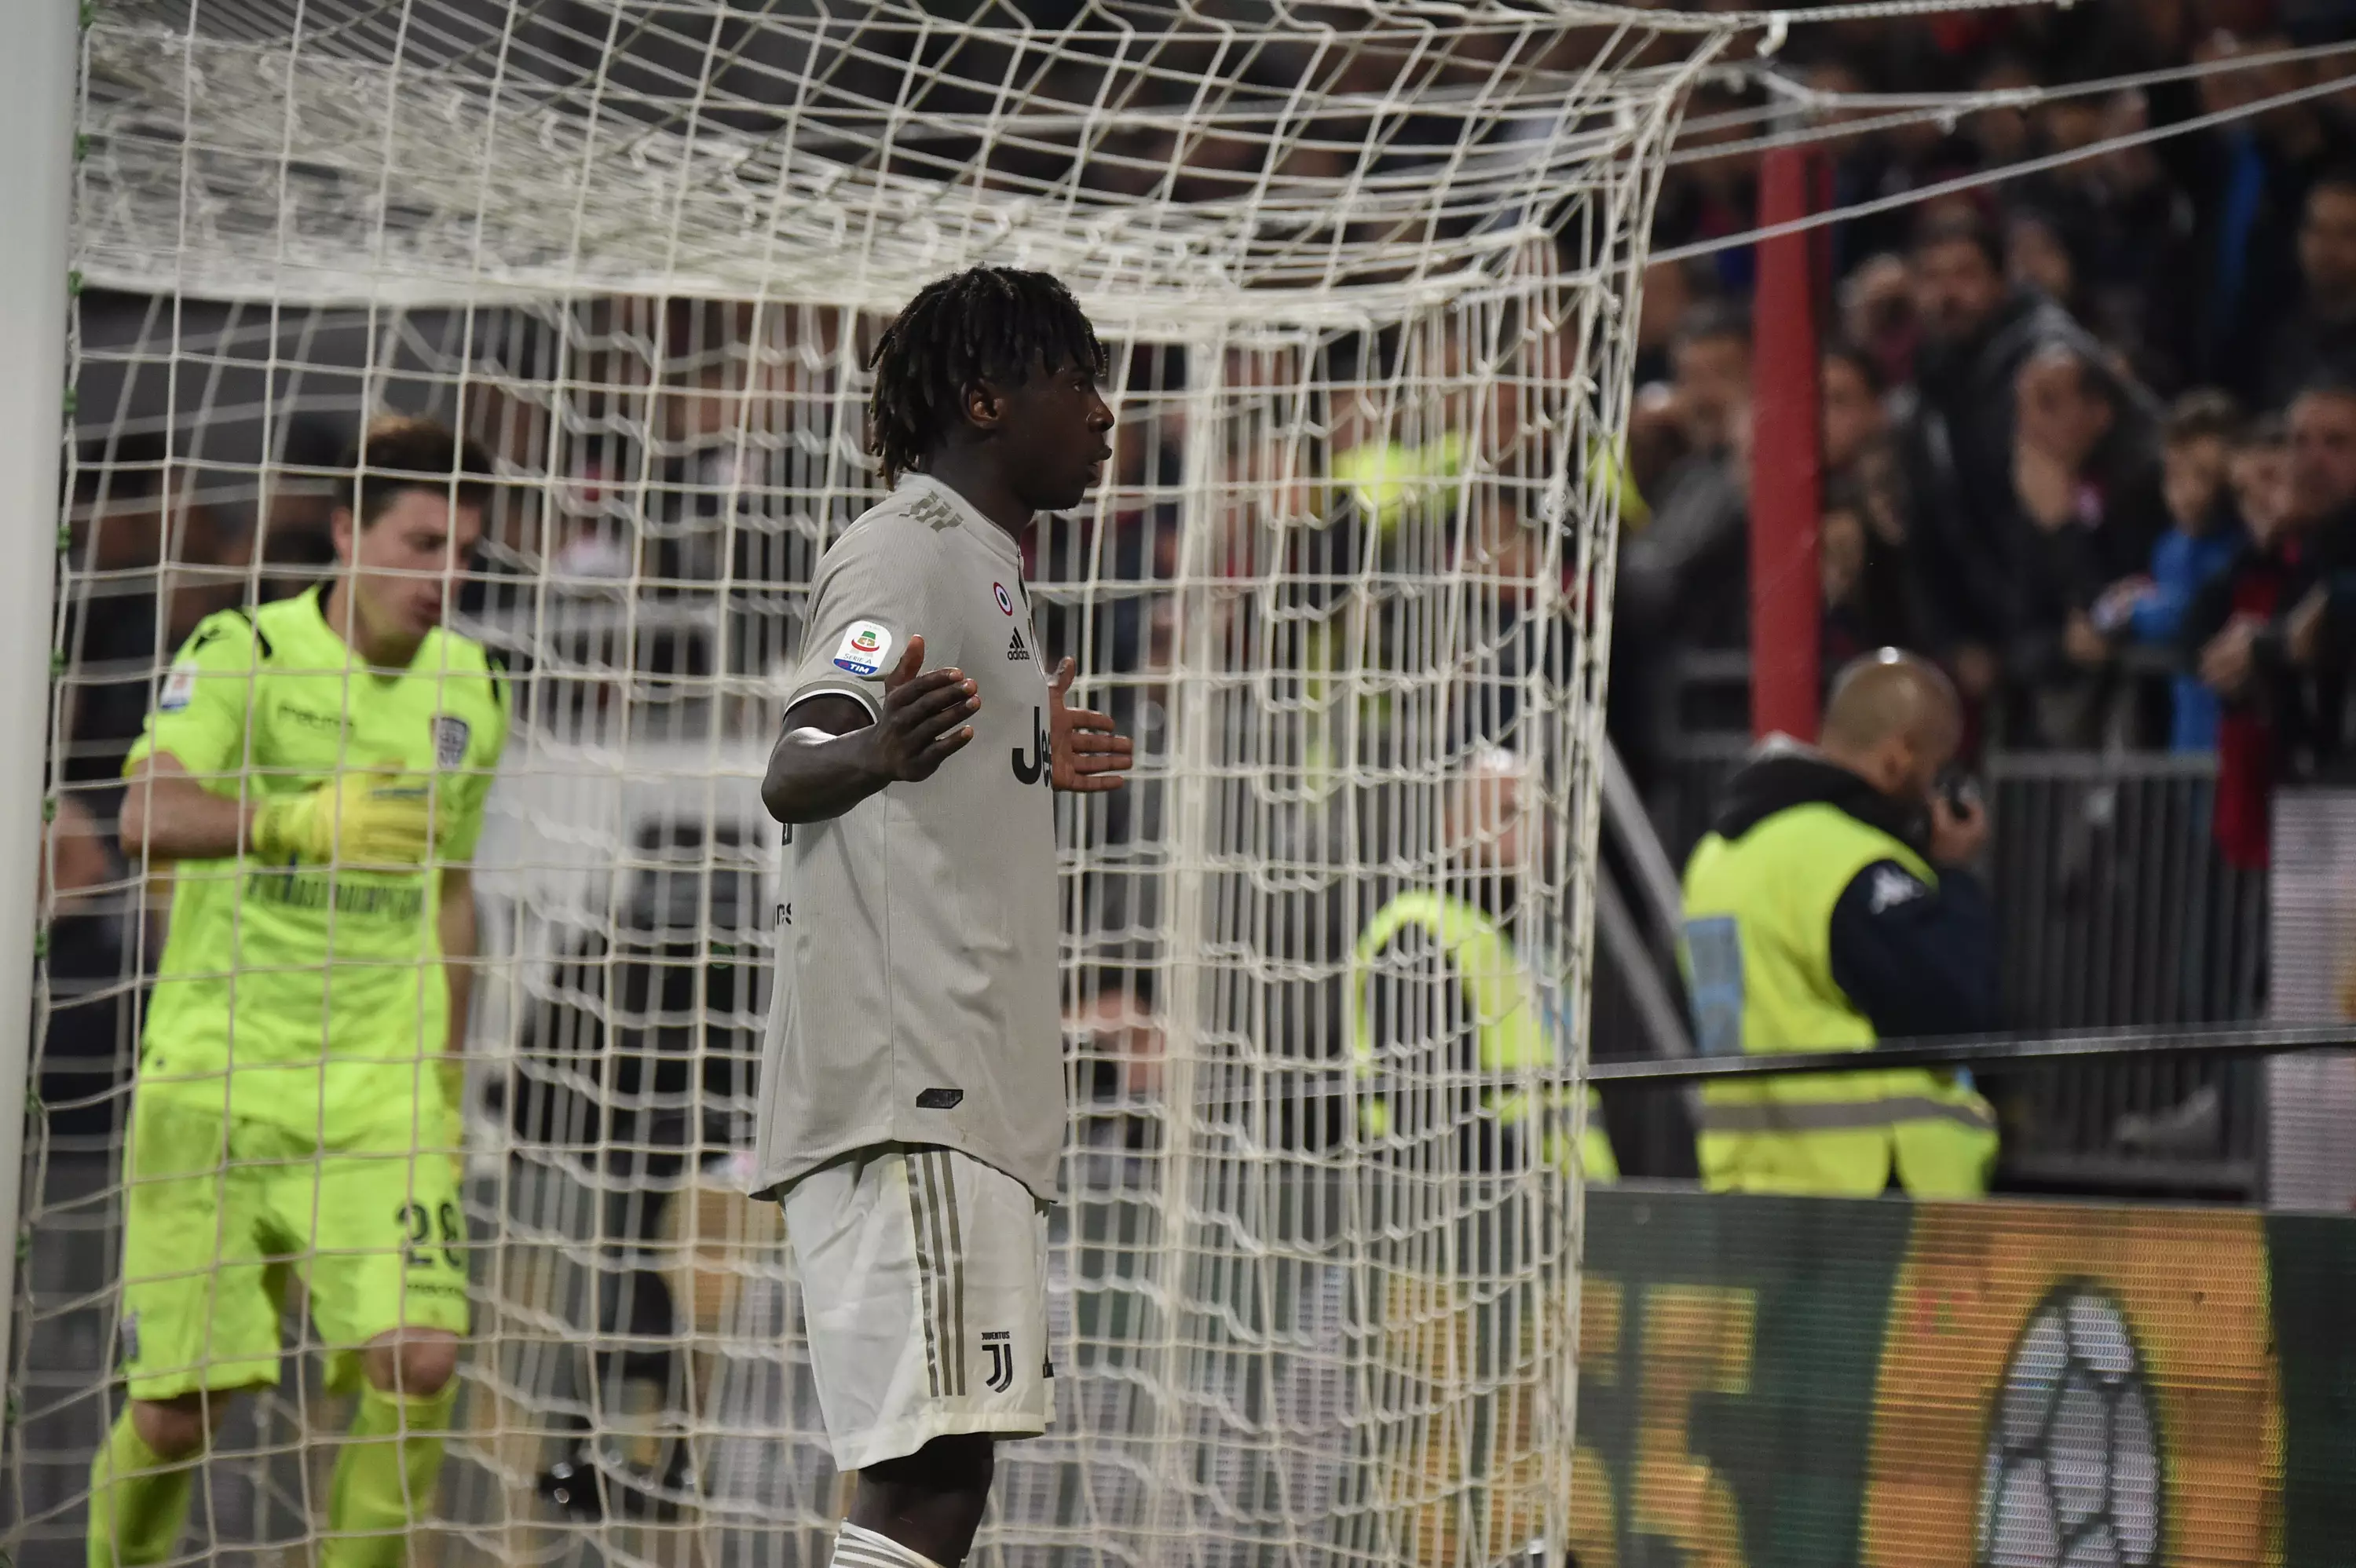 Current Everton striker Moise Kean was racially abused while playing for Juventus this year. (Image